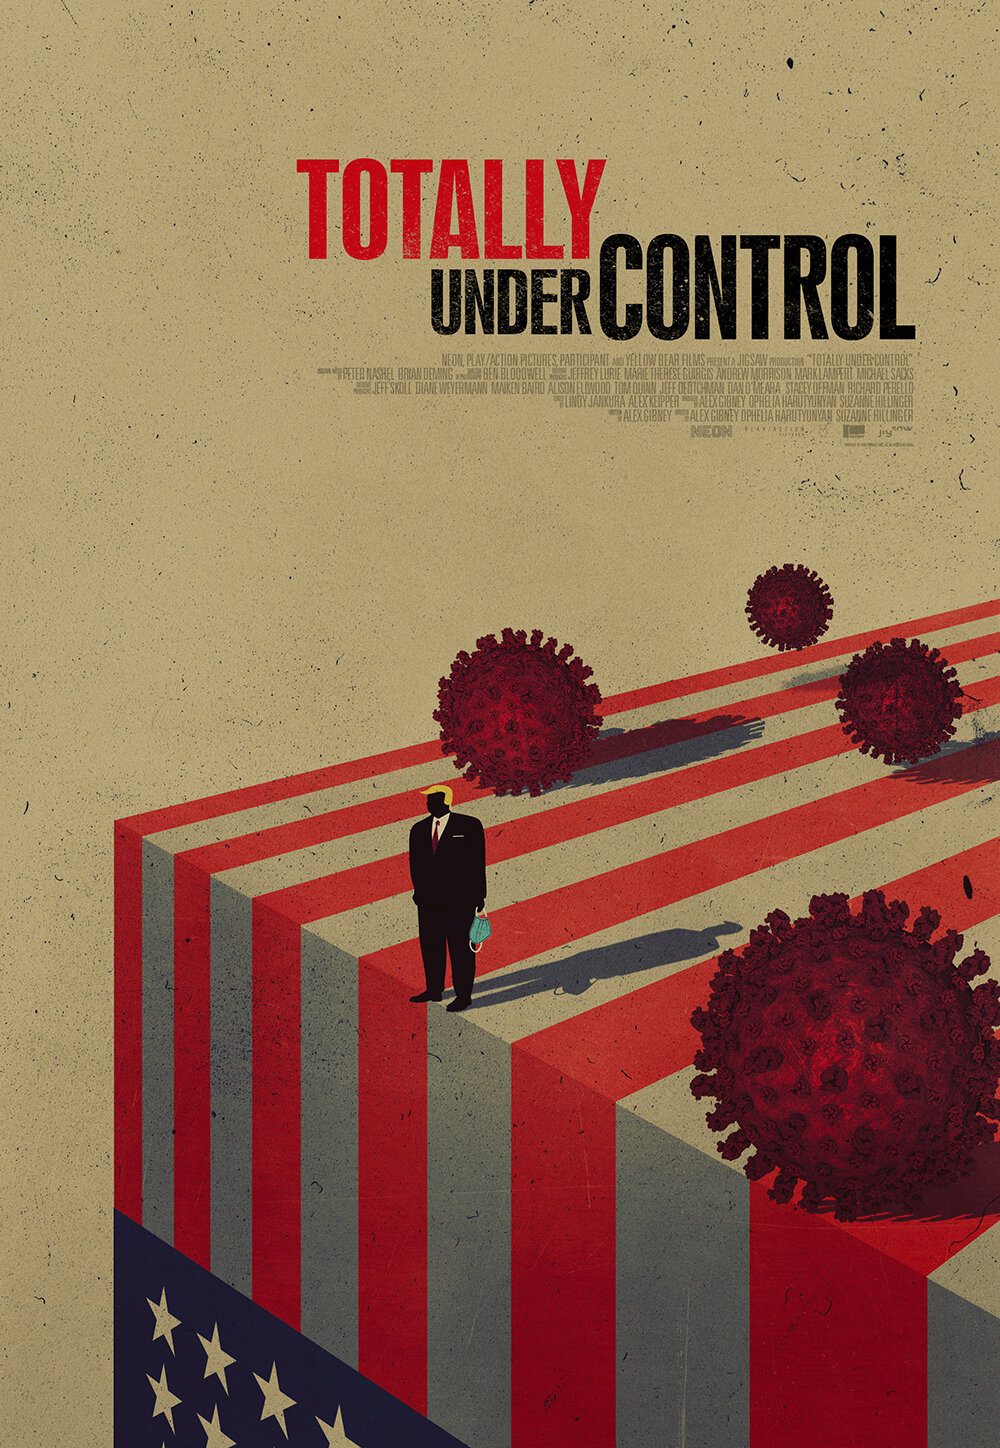 Totally Under Control // NZ Publicity Campaign